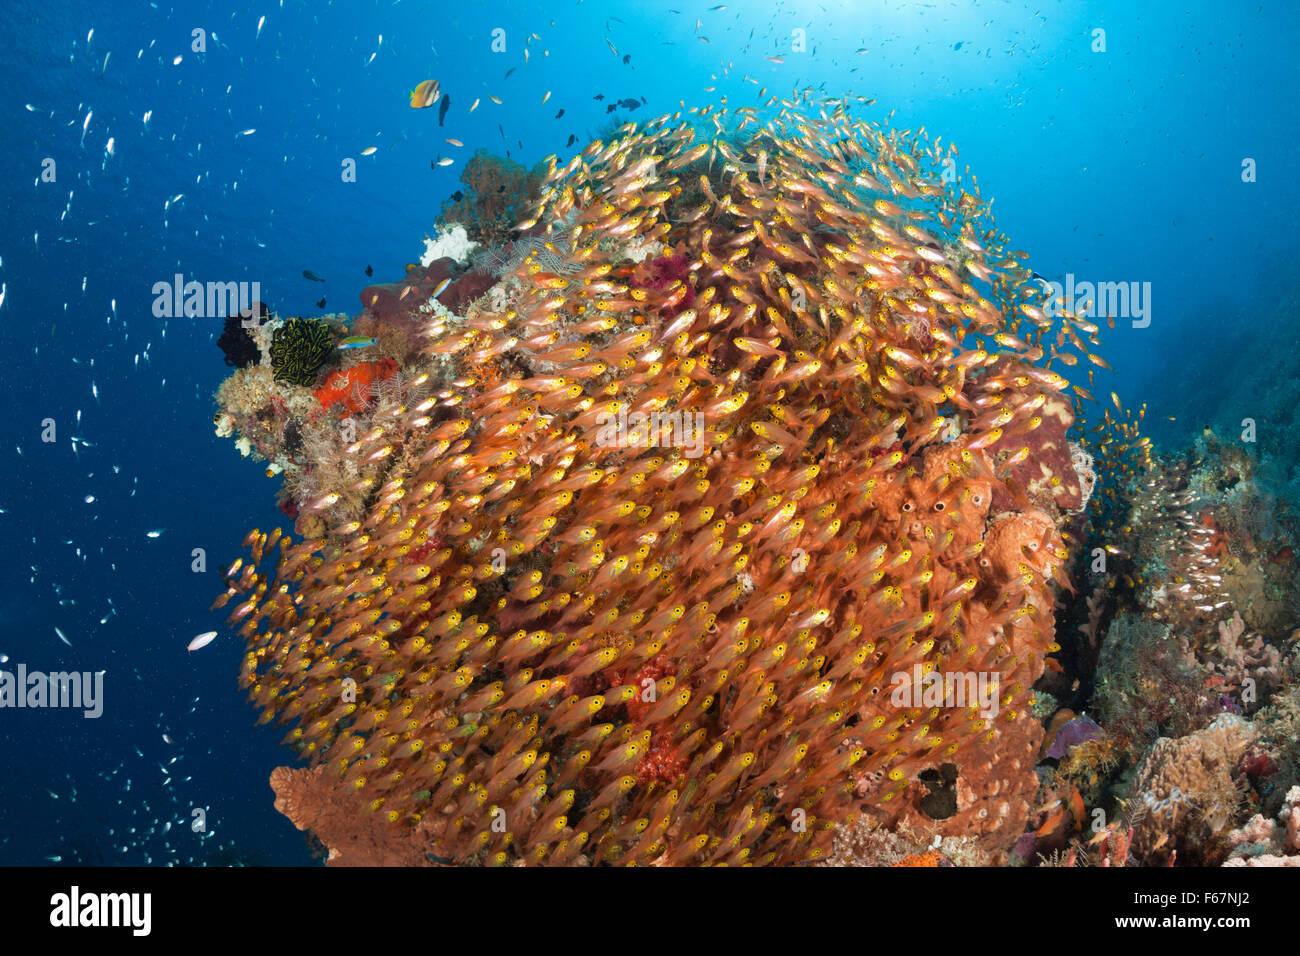 Glassy Sweepers in Coral Reef, Parapriacanthus ransonneti, Komodo National Park, Indonesia Stock Photo